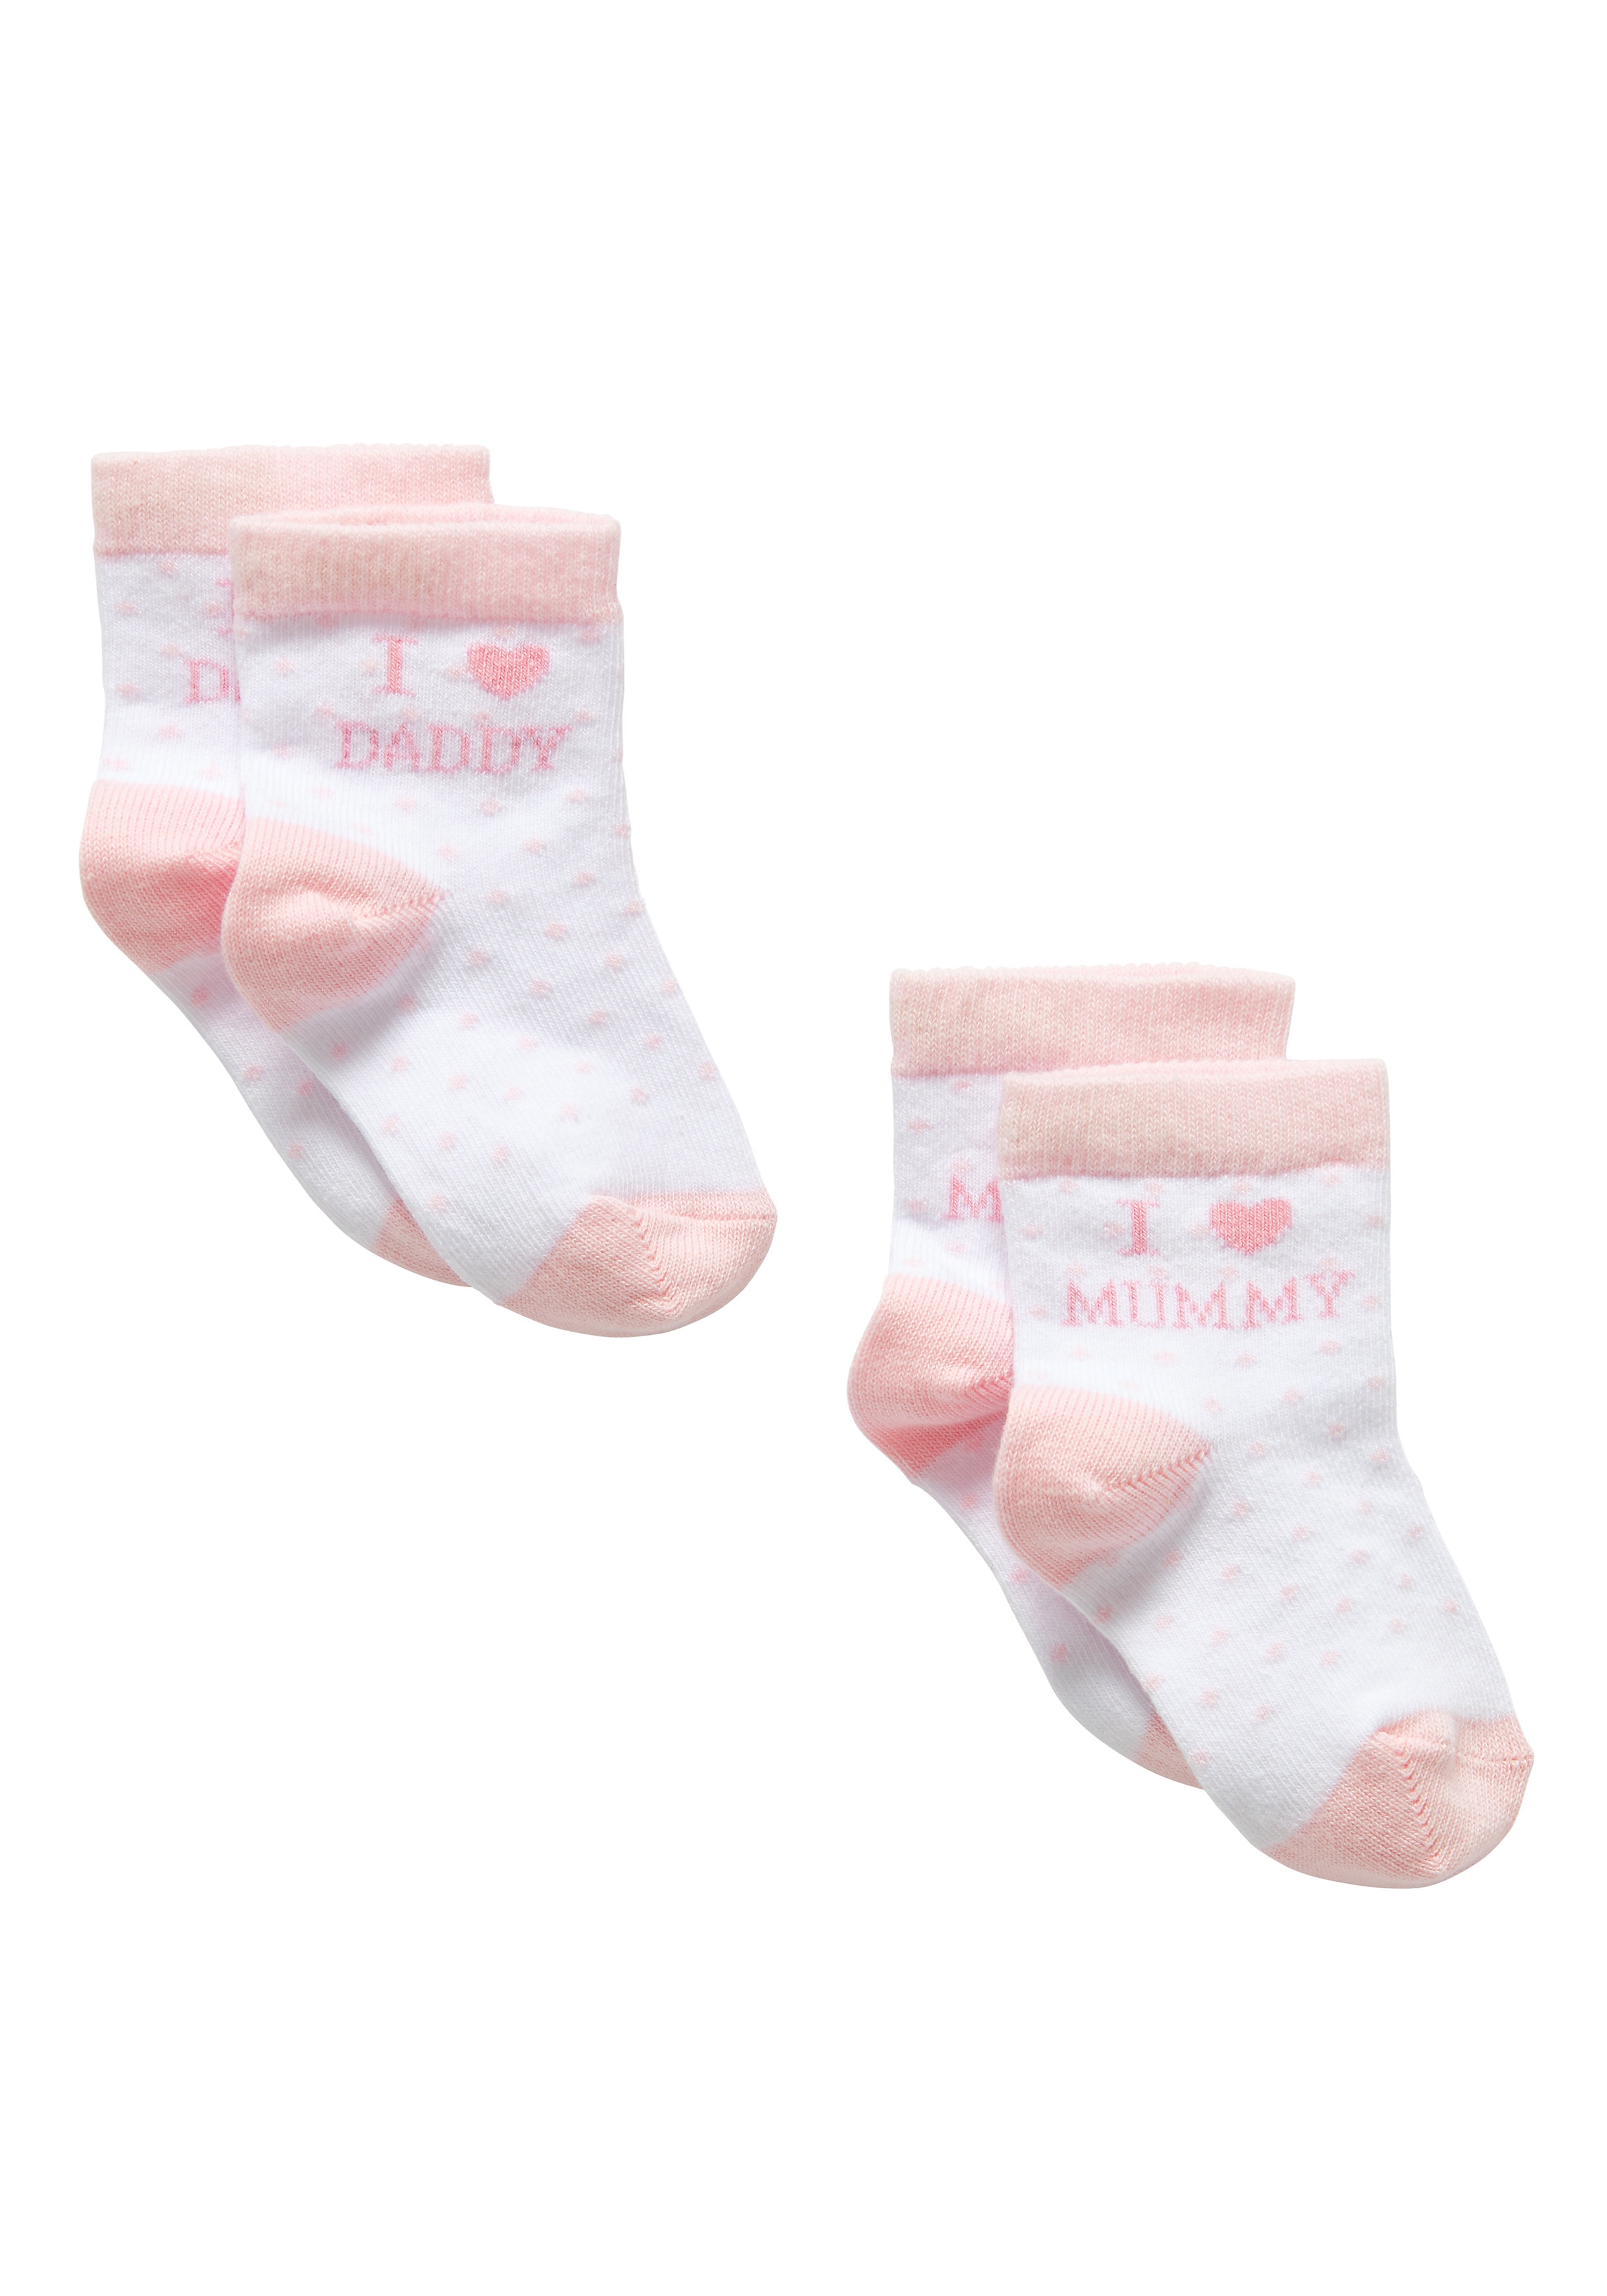 Mothercare | Girls I Love Mummy And Daddy Socks (Pink) - 2 Pack - Pink 0